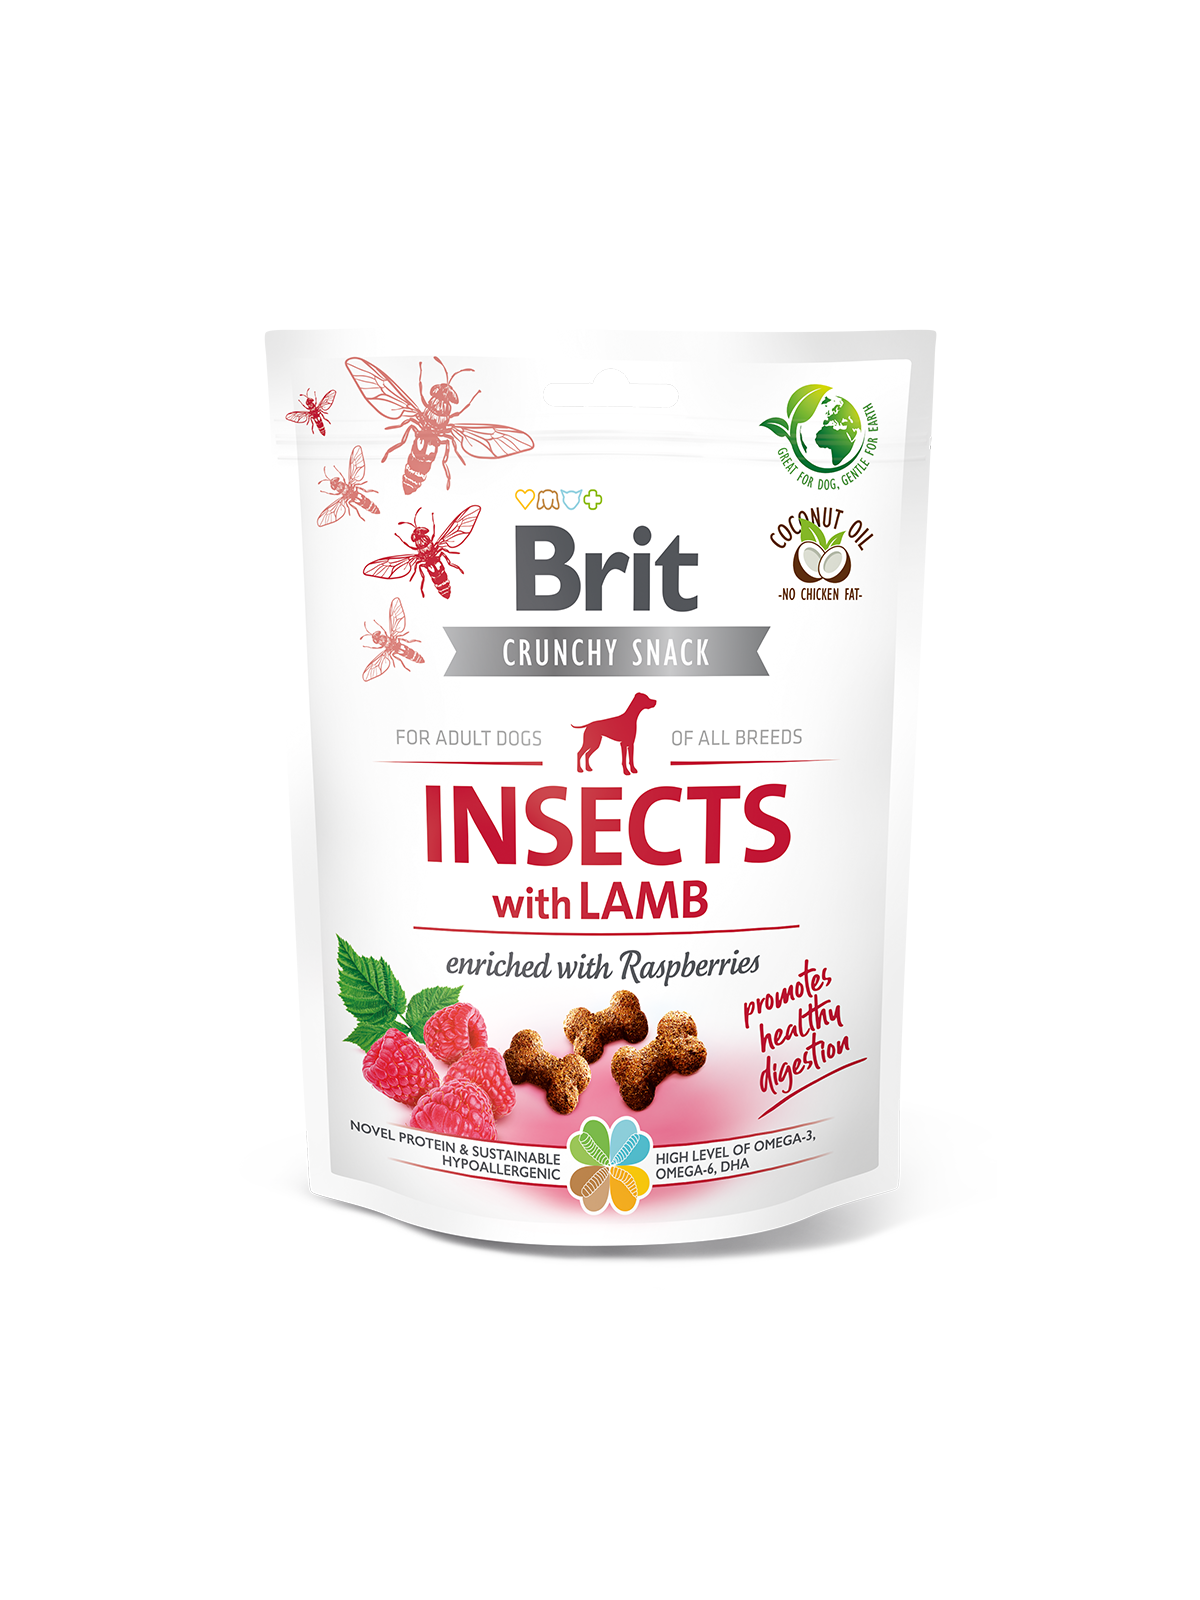 Brit Care Dog Crunchy Cracker Insect with Lamb enriched with Raspberries 200 g